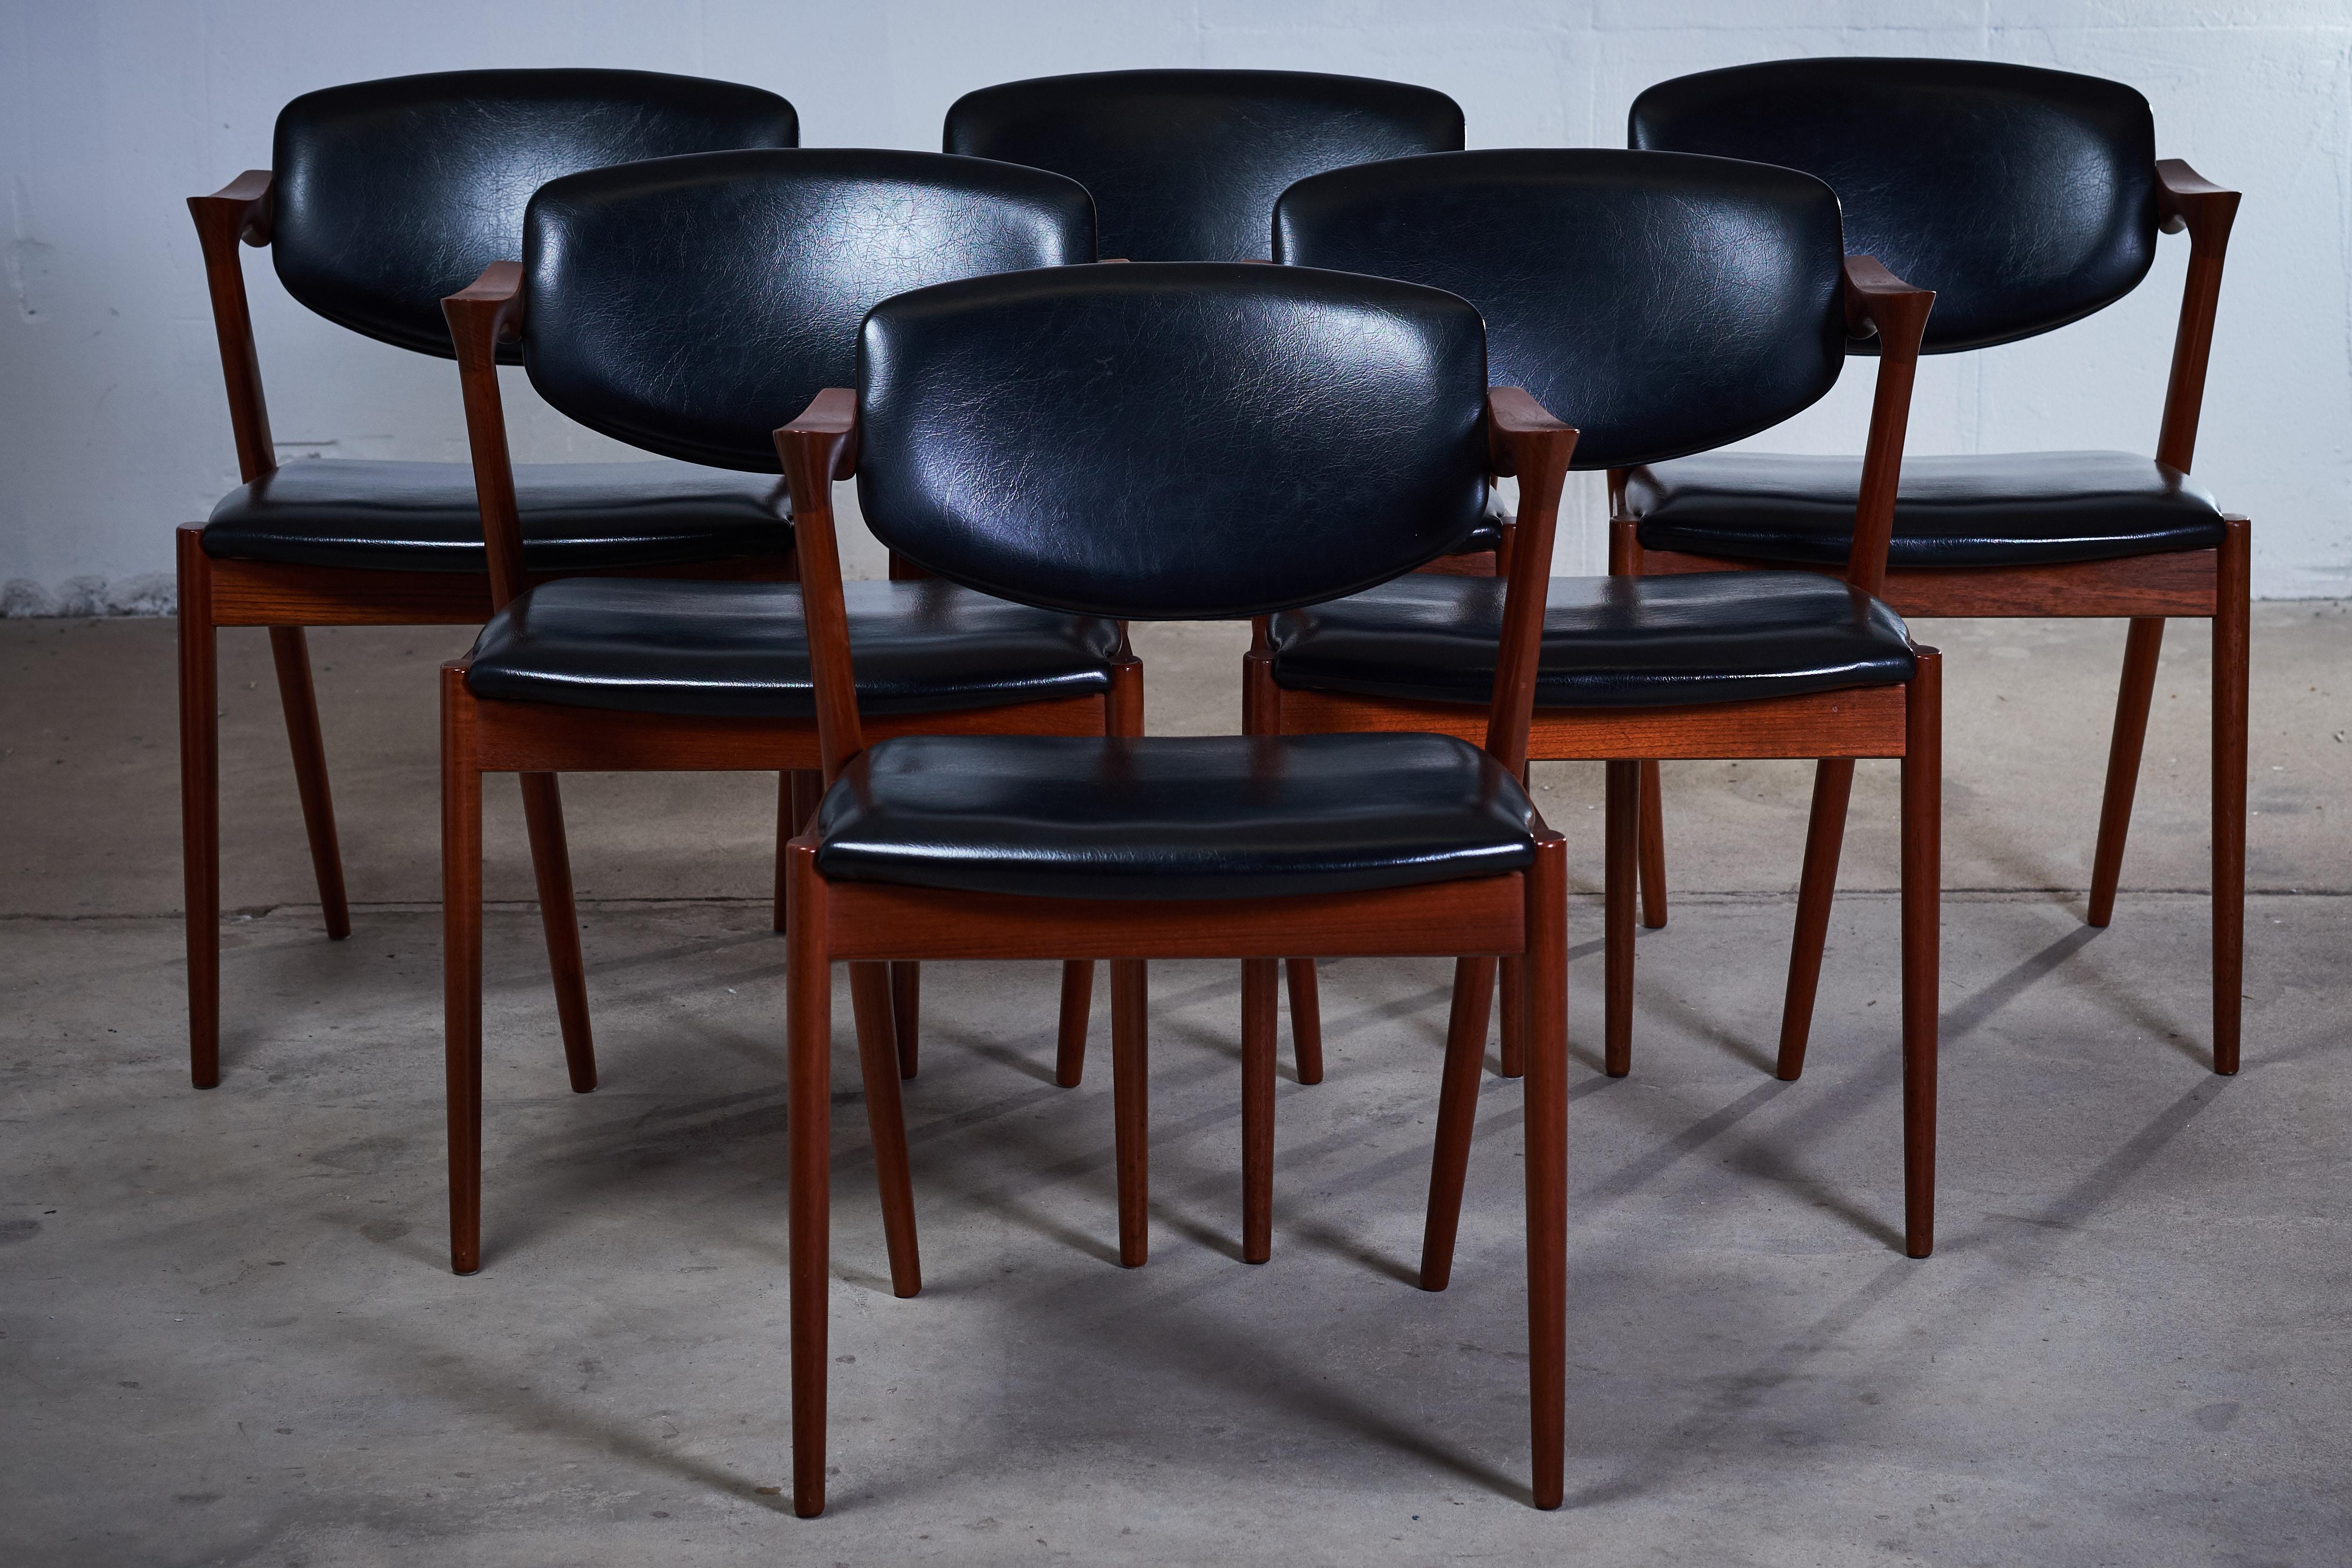 Six teak dining 'Z-chairs' #Model42 by Kai Kristiansen - Danish design.
The tilting backrest and small armrests provide supreme comfort and a stunning silhouette. This chair must be one of Kristiansen's most famous designs. The comfort in these